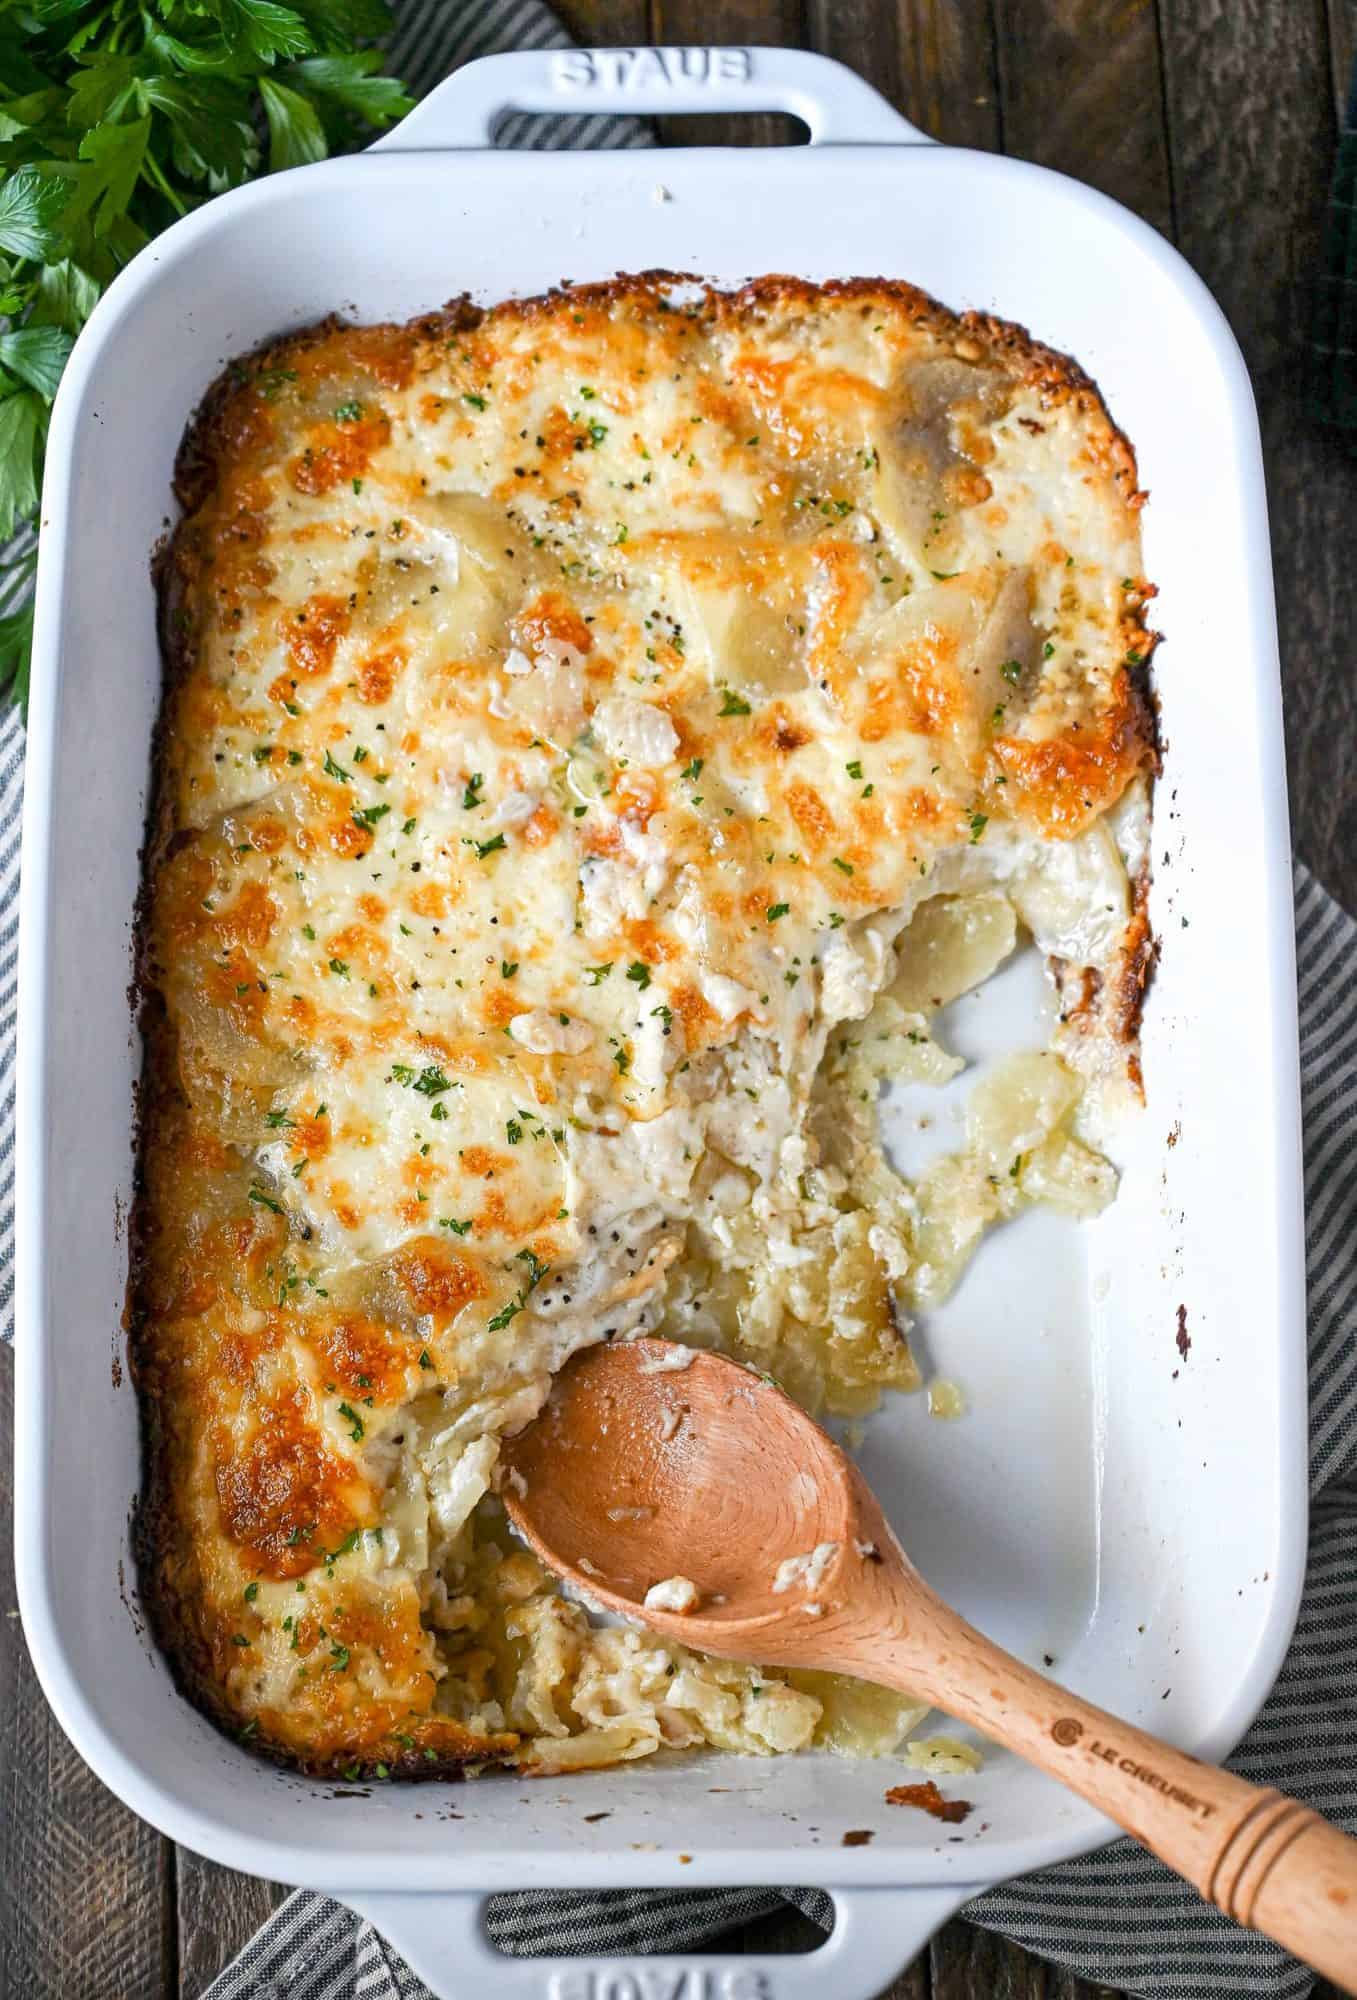 Potatoes au gratin in a white casserole dish with a few scoops missing.